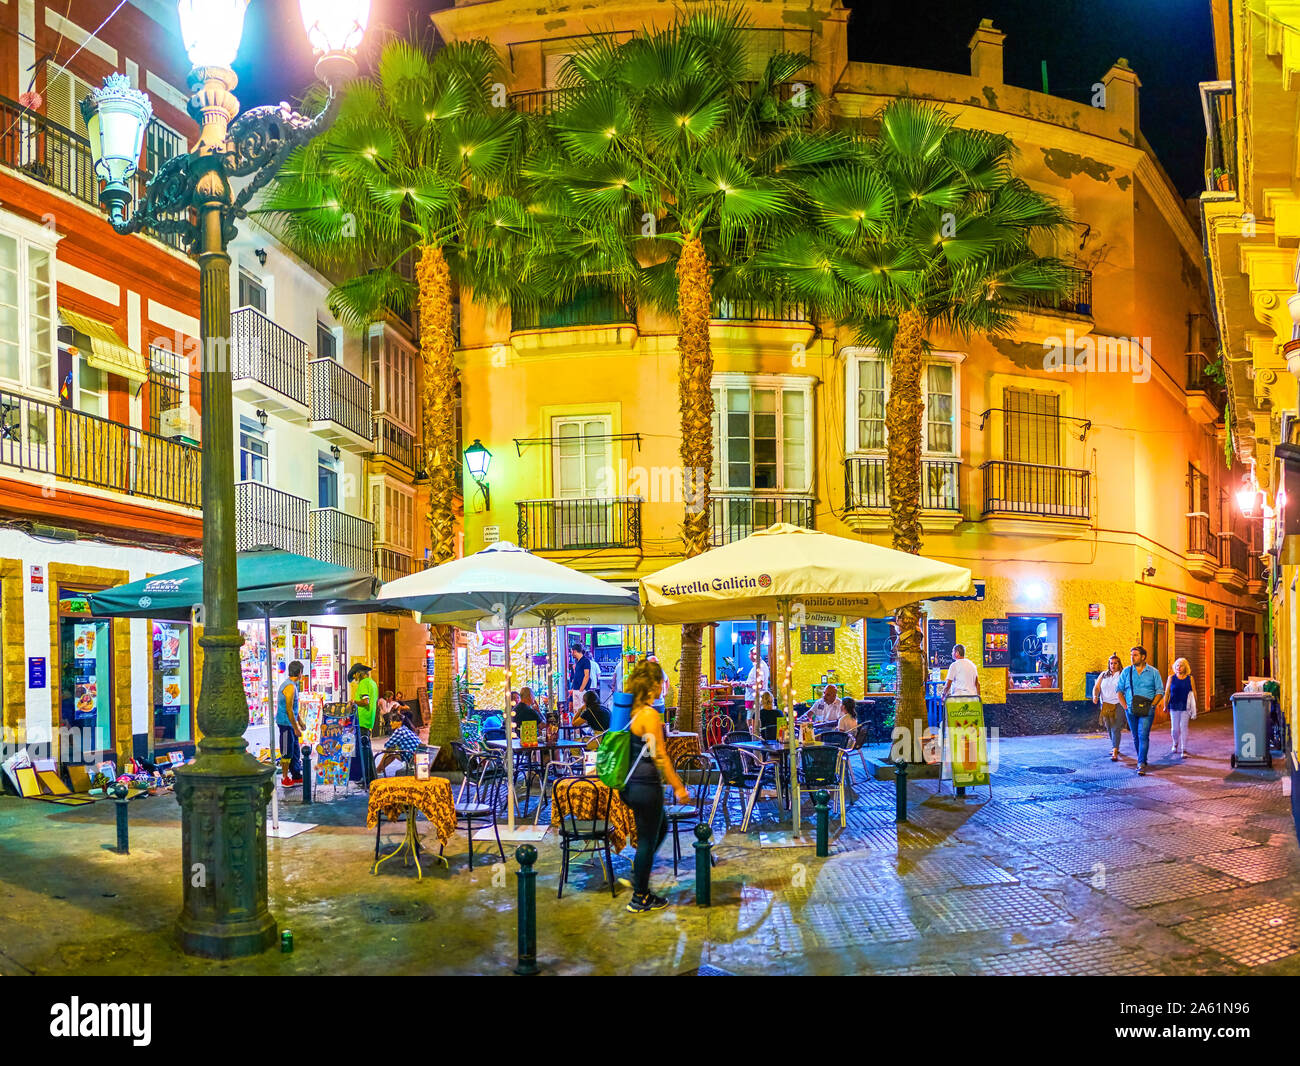 CADIZ, SPAIN - SEPTEMBER 19, 2019: The cozy outdoor restaurant in the tiny Antonio Martin square in a maze of medieval streets in Cadiz is a fine plac Stock Photo